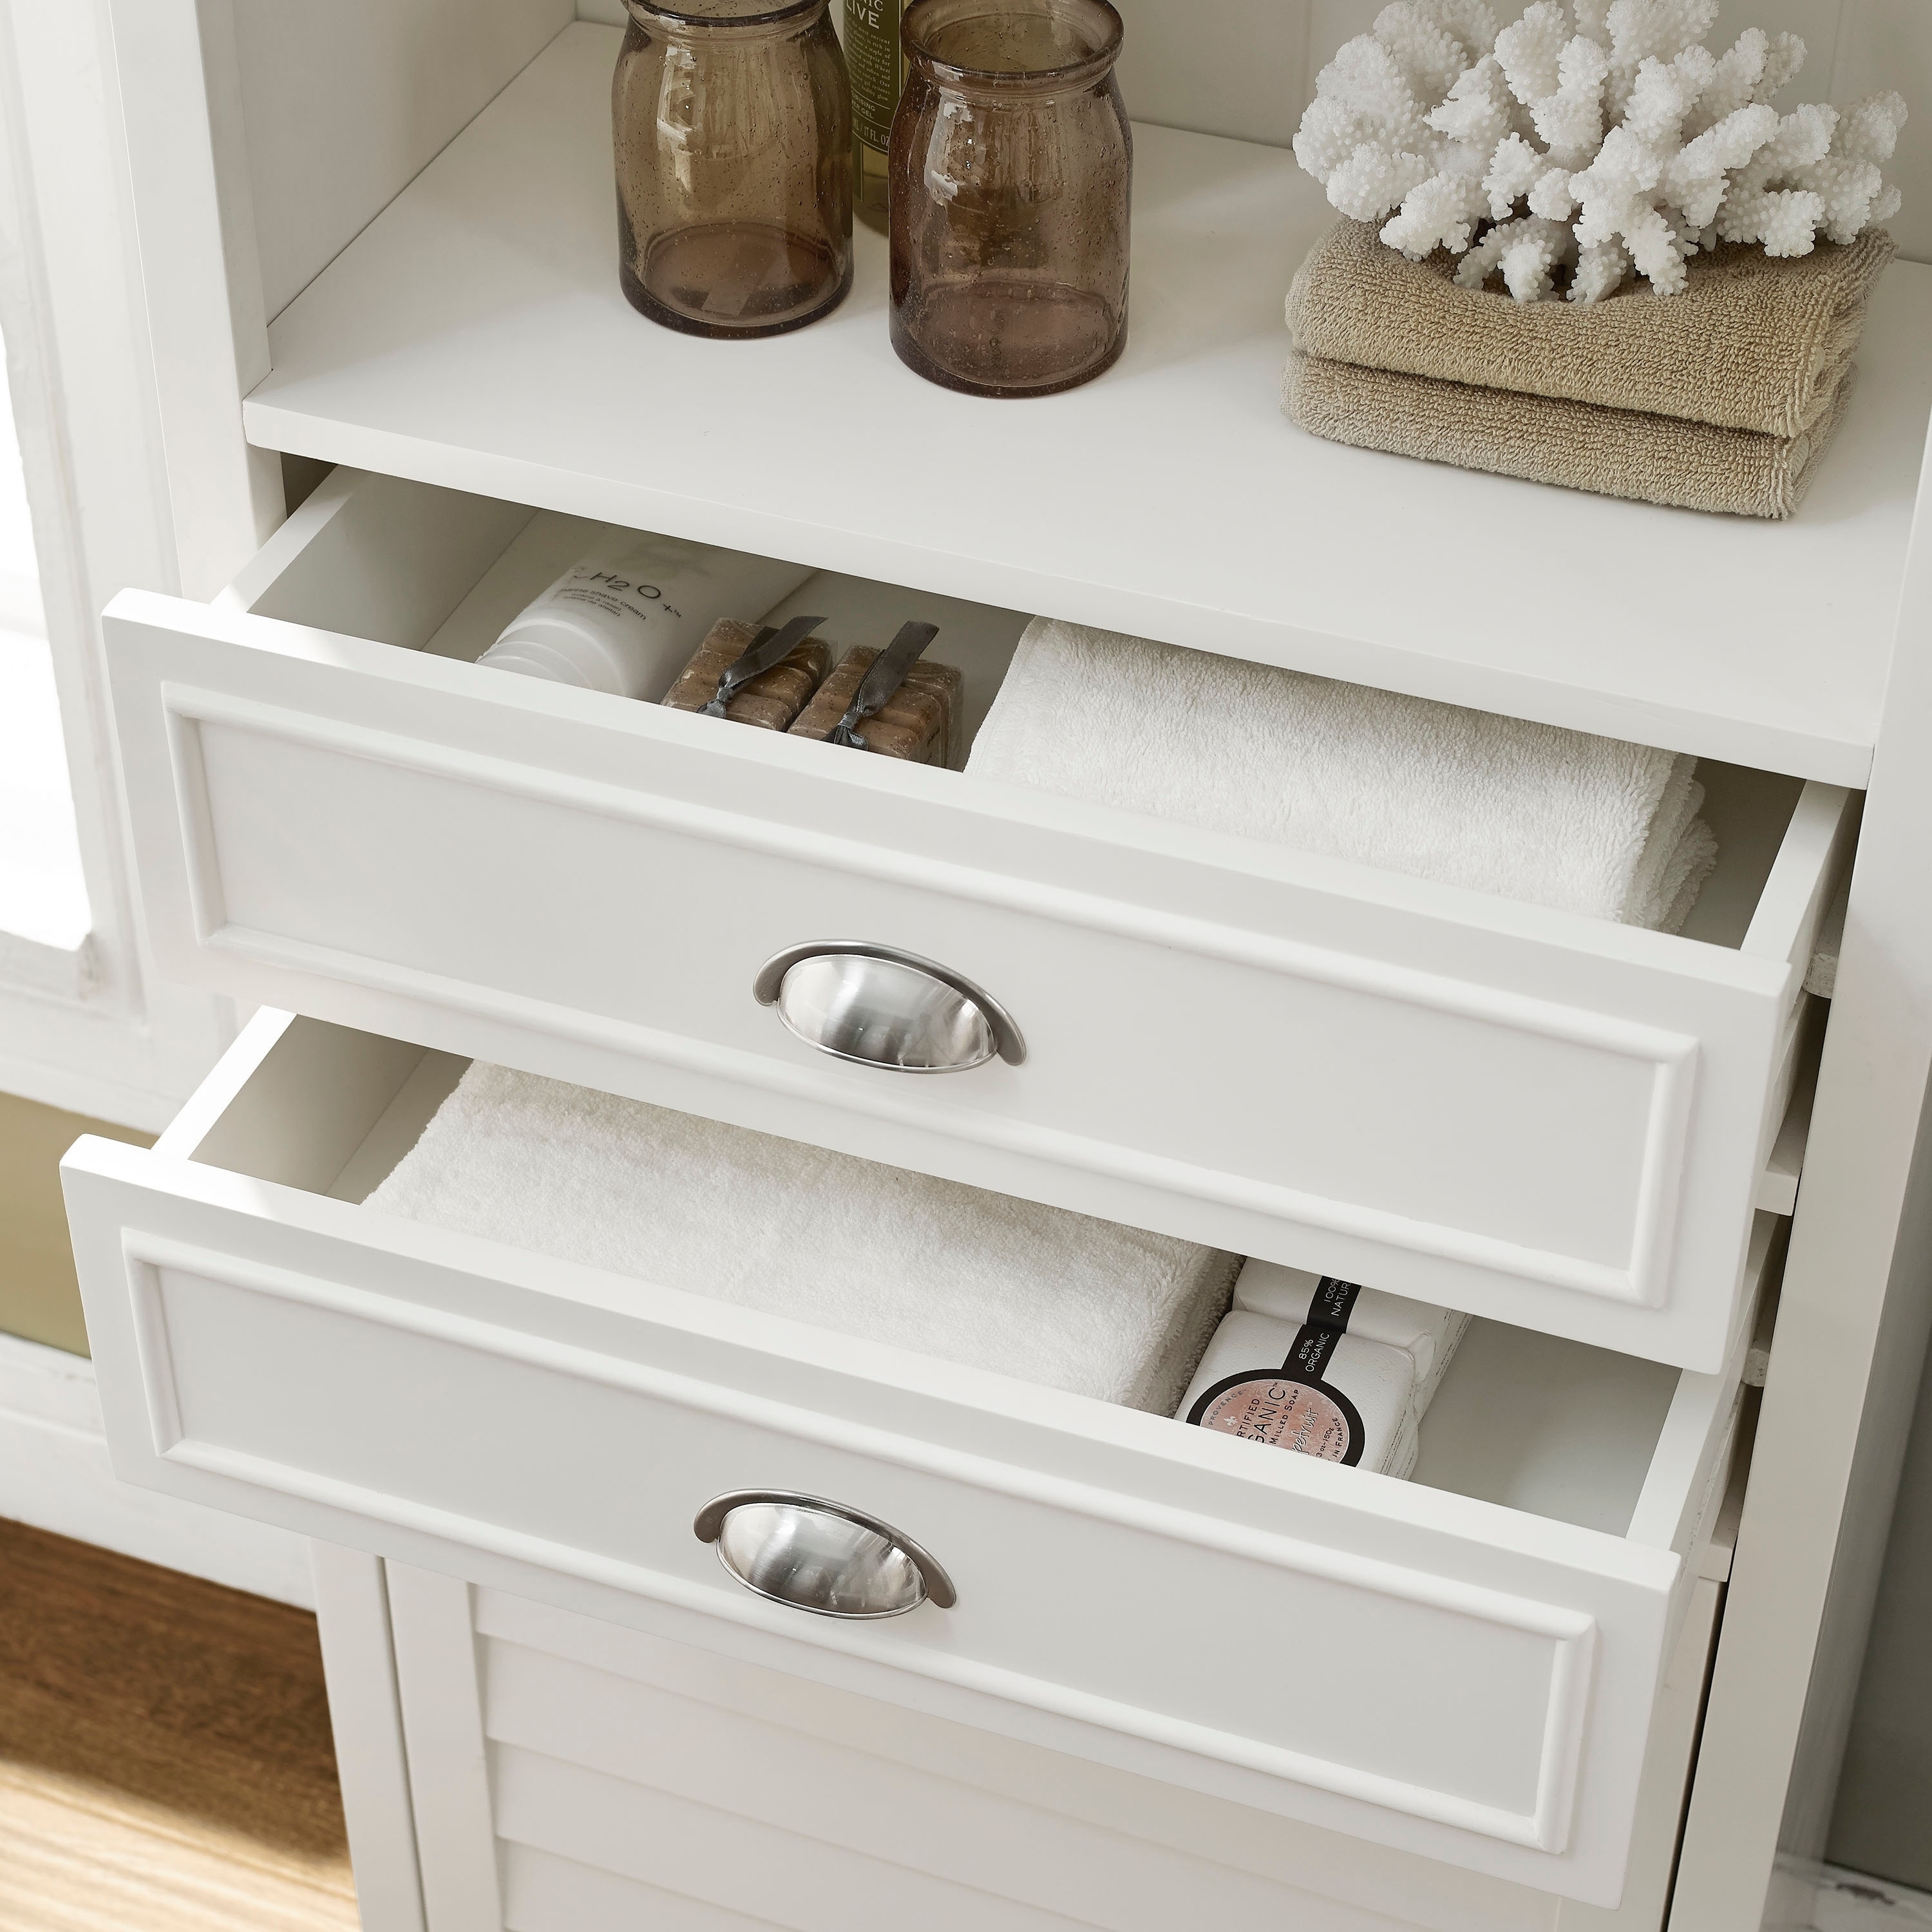 https://ak1.ostkcdn.com/images/products/16047294/Lydia-Tall-Cabinet-in-White-e7689c8e-6d38-4ff6-90b5-a0b8d4bf4b24.jpg